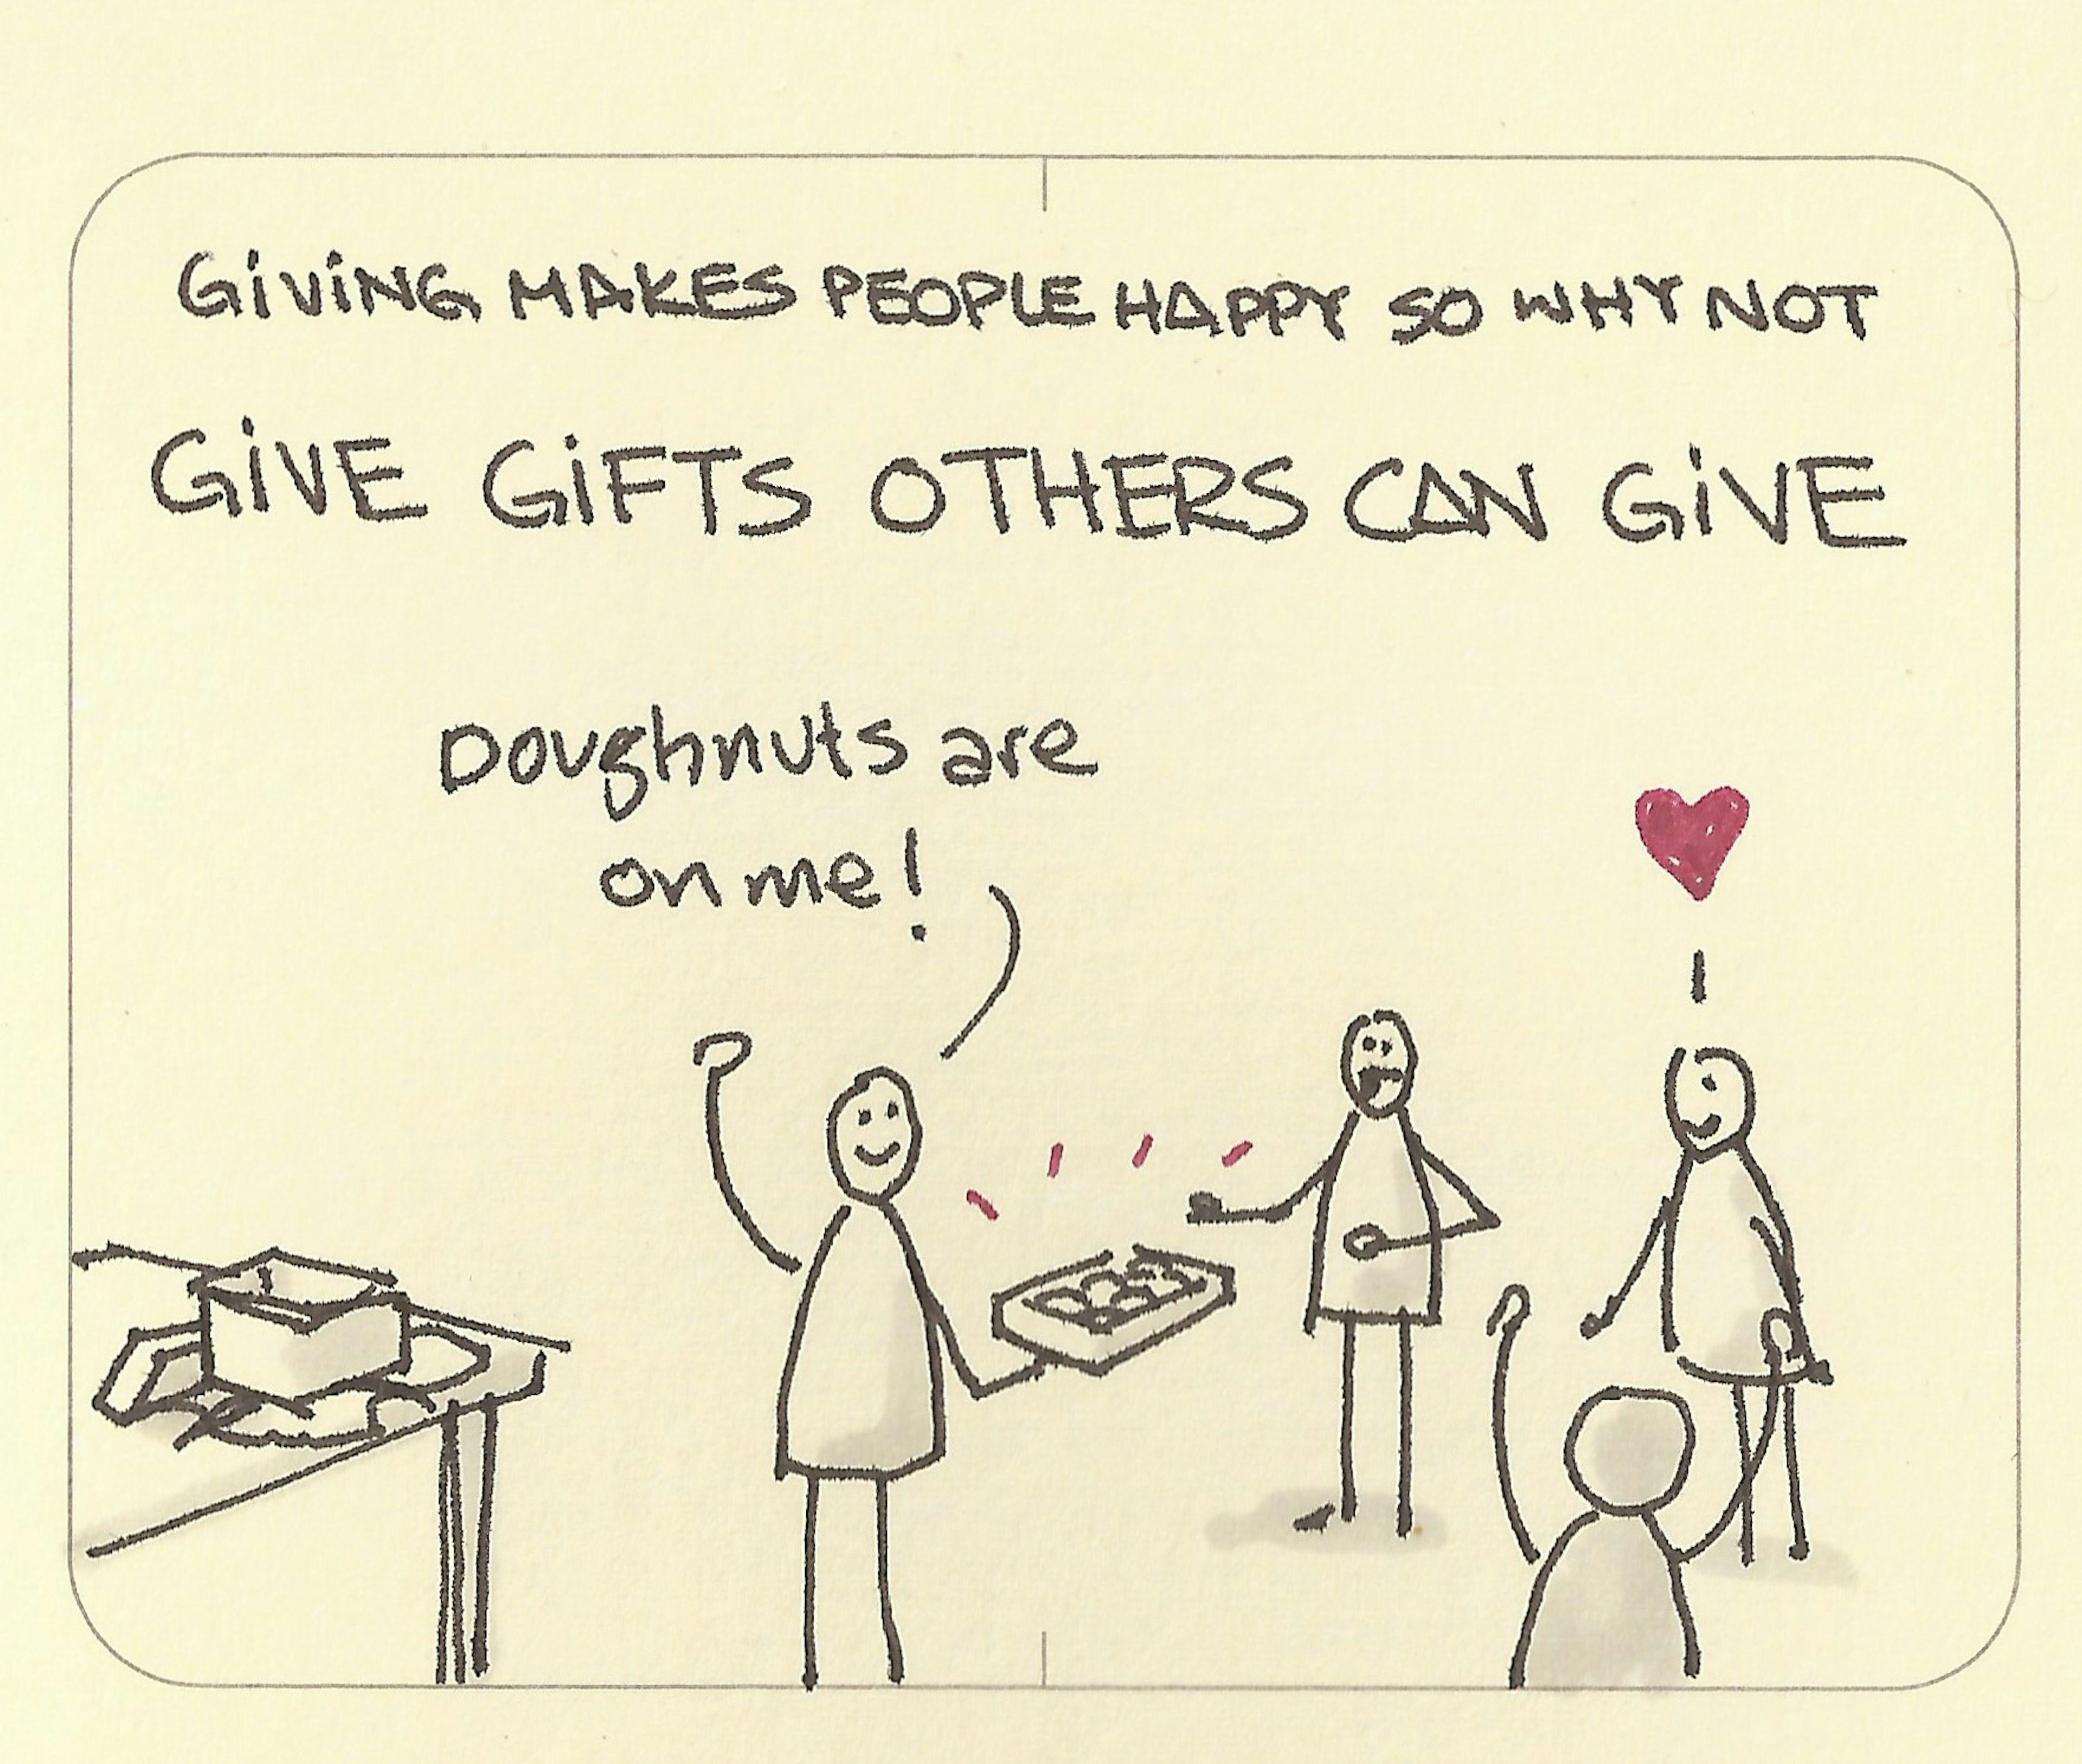 Give gifts others can give - Sketchplanations